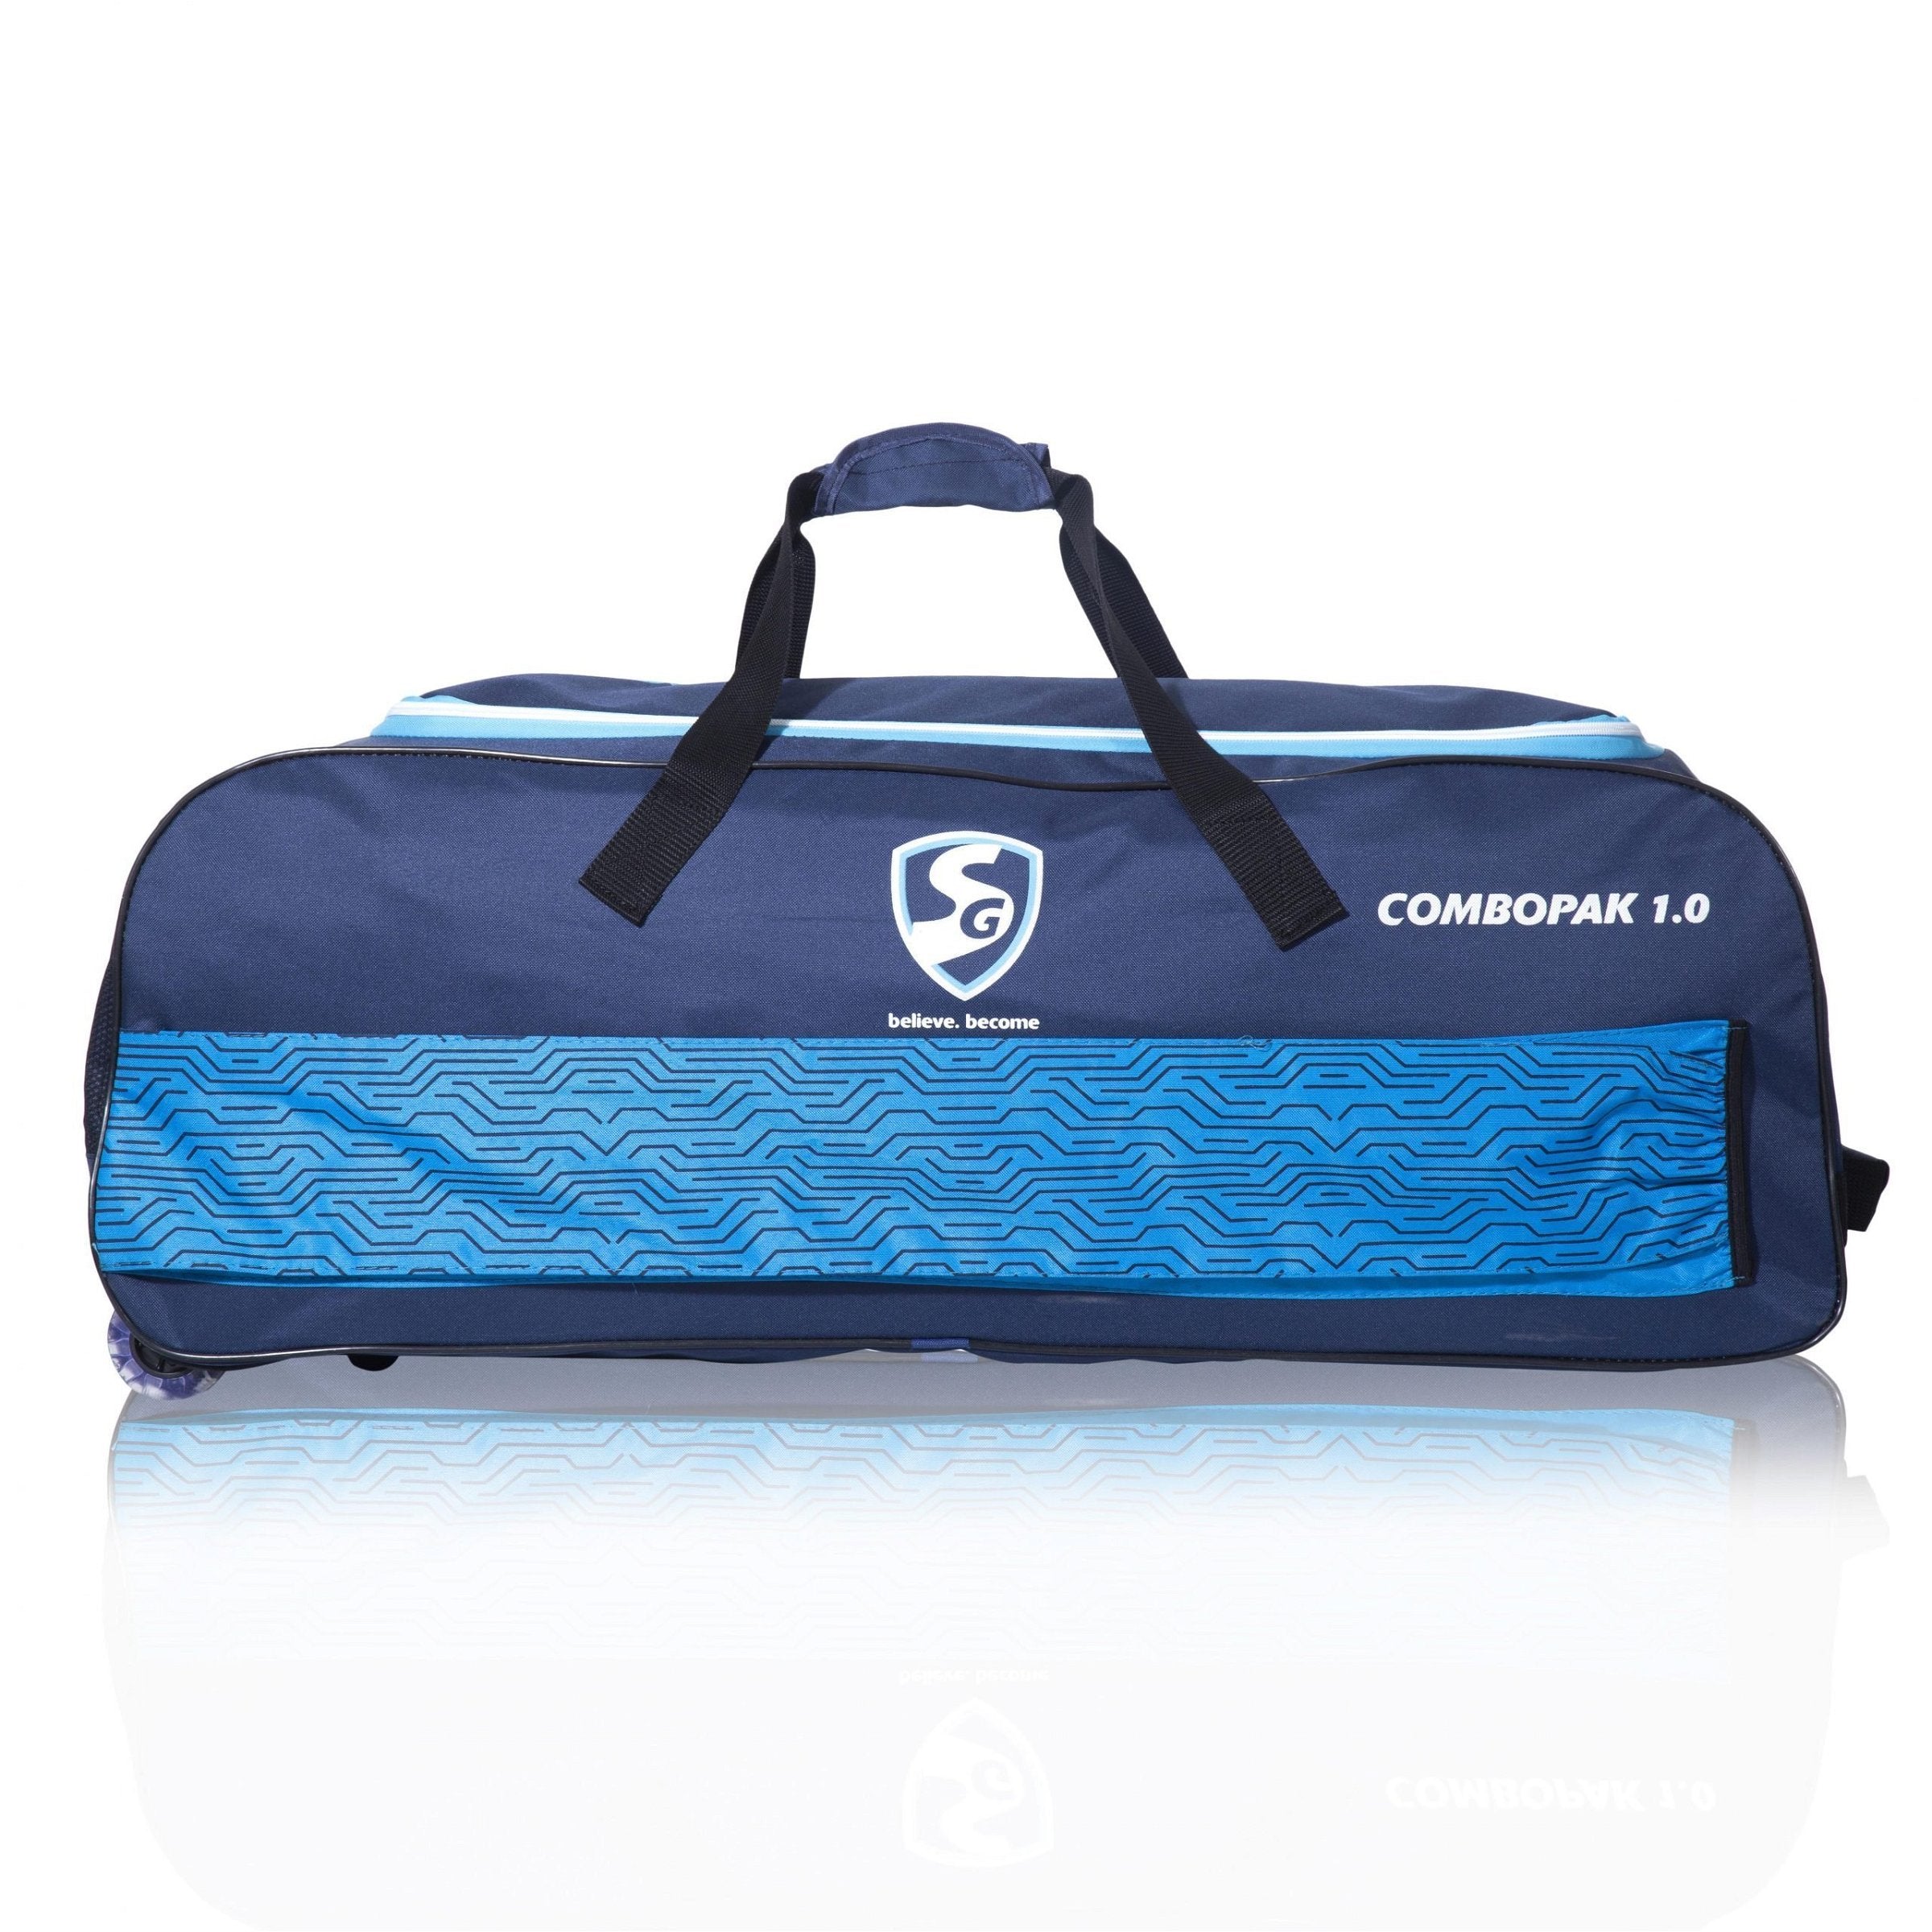 Compact and Eco-friendly Cricket Kit Bag with SG India | Ubuy